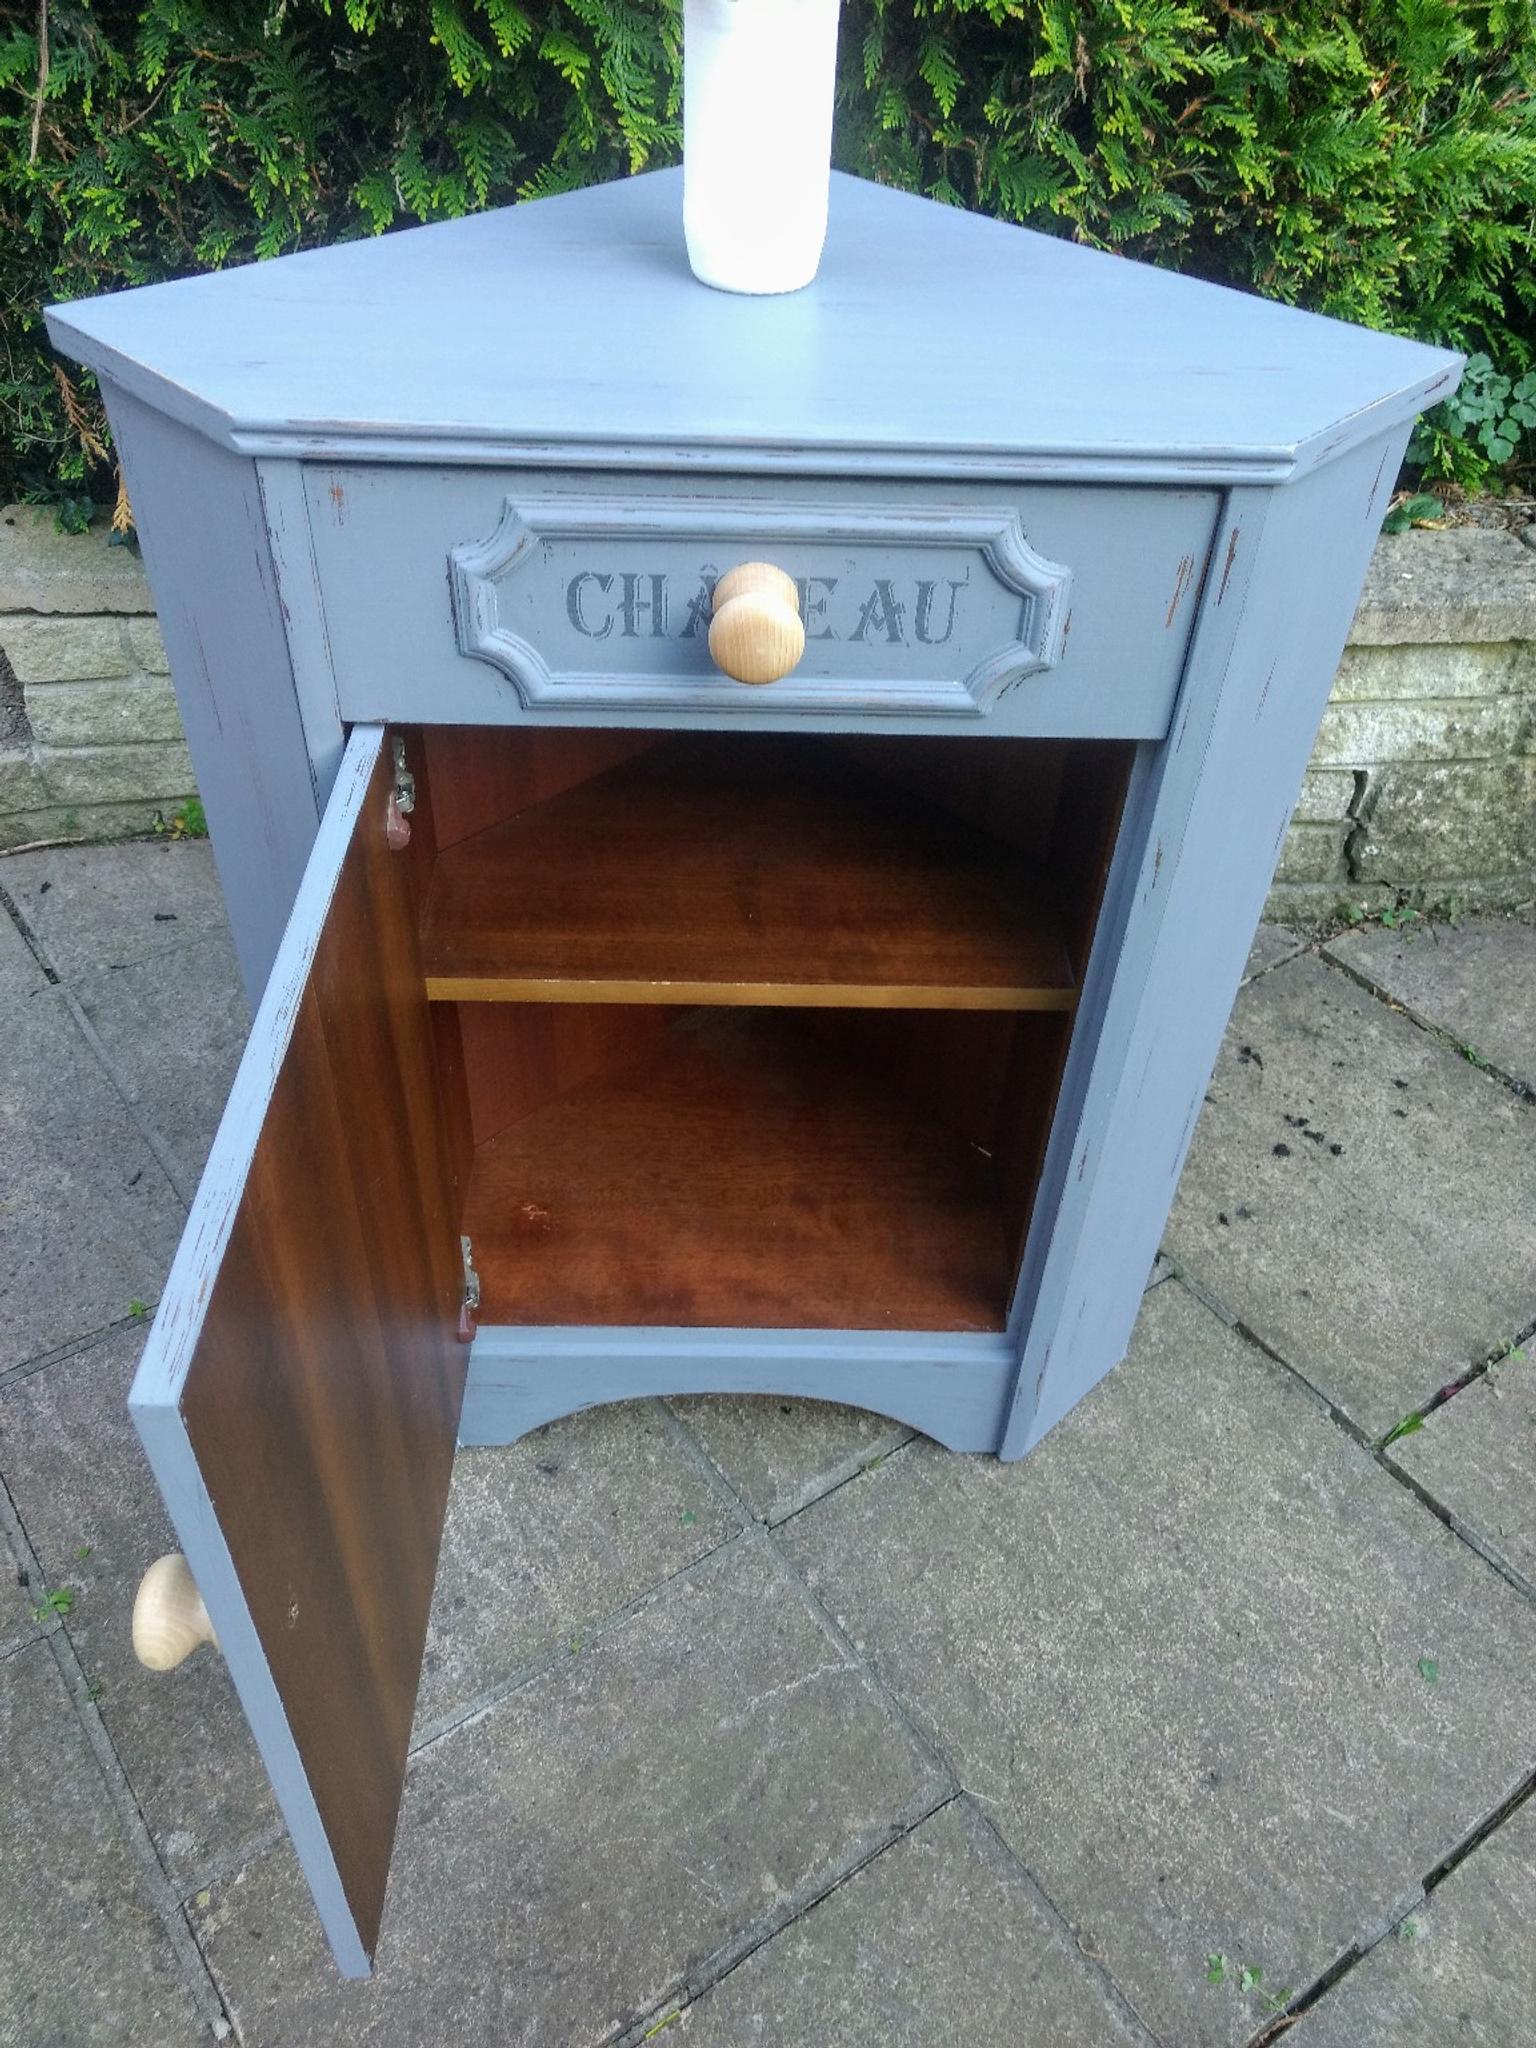 Shabby Chic Corner Cupboard In Dilton Marsh For 40 00 For Sale